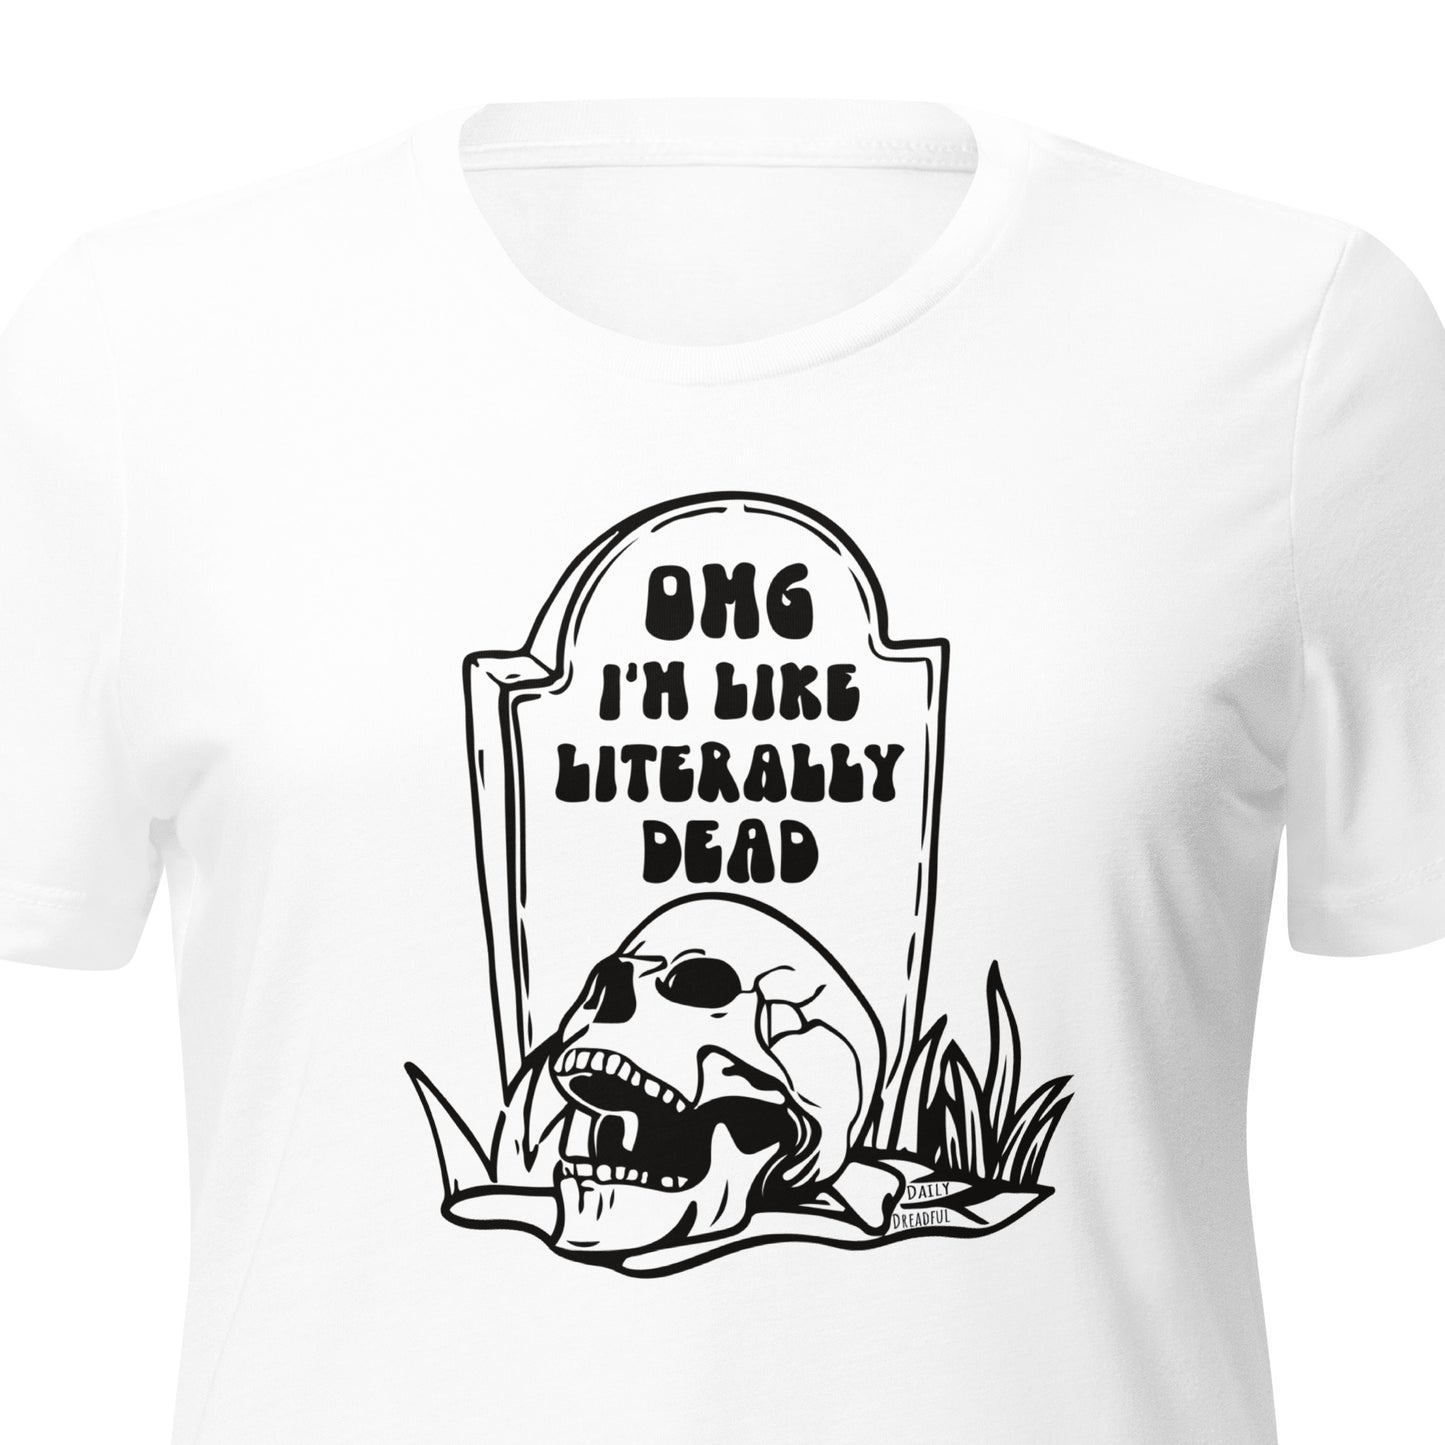 white "OMG Dead" Women's relaxed tri-blend t-shirt from Daily Dreadful